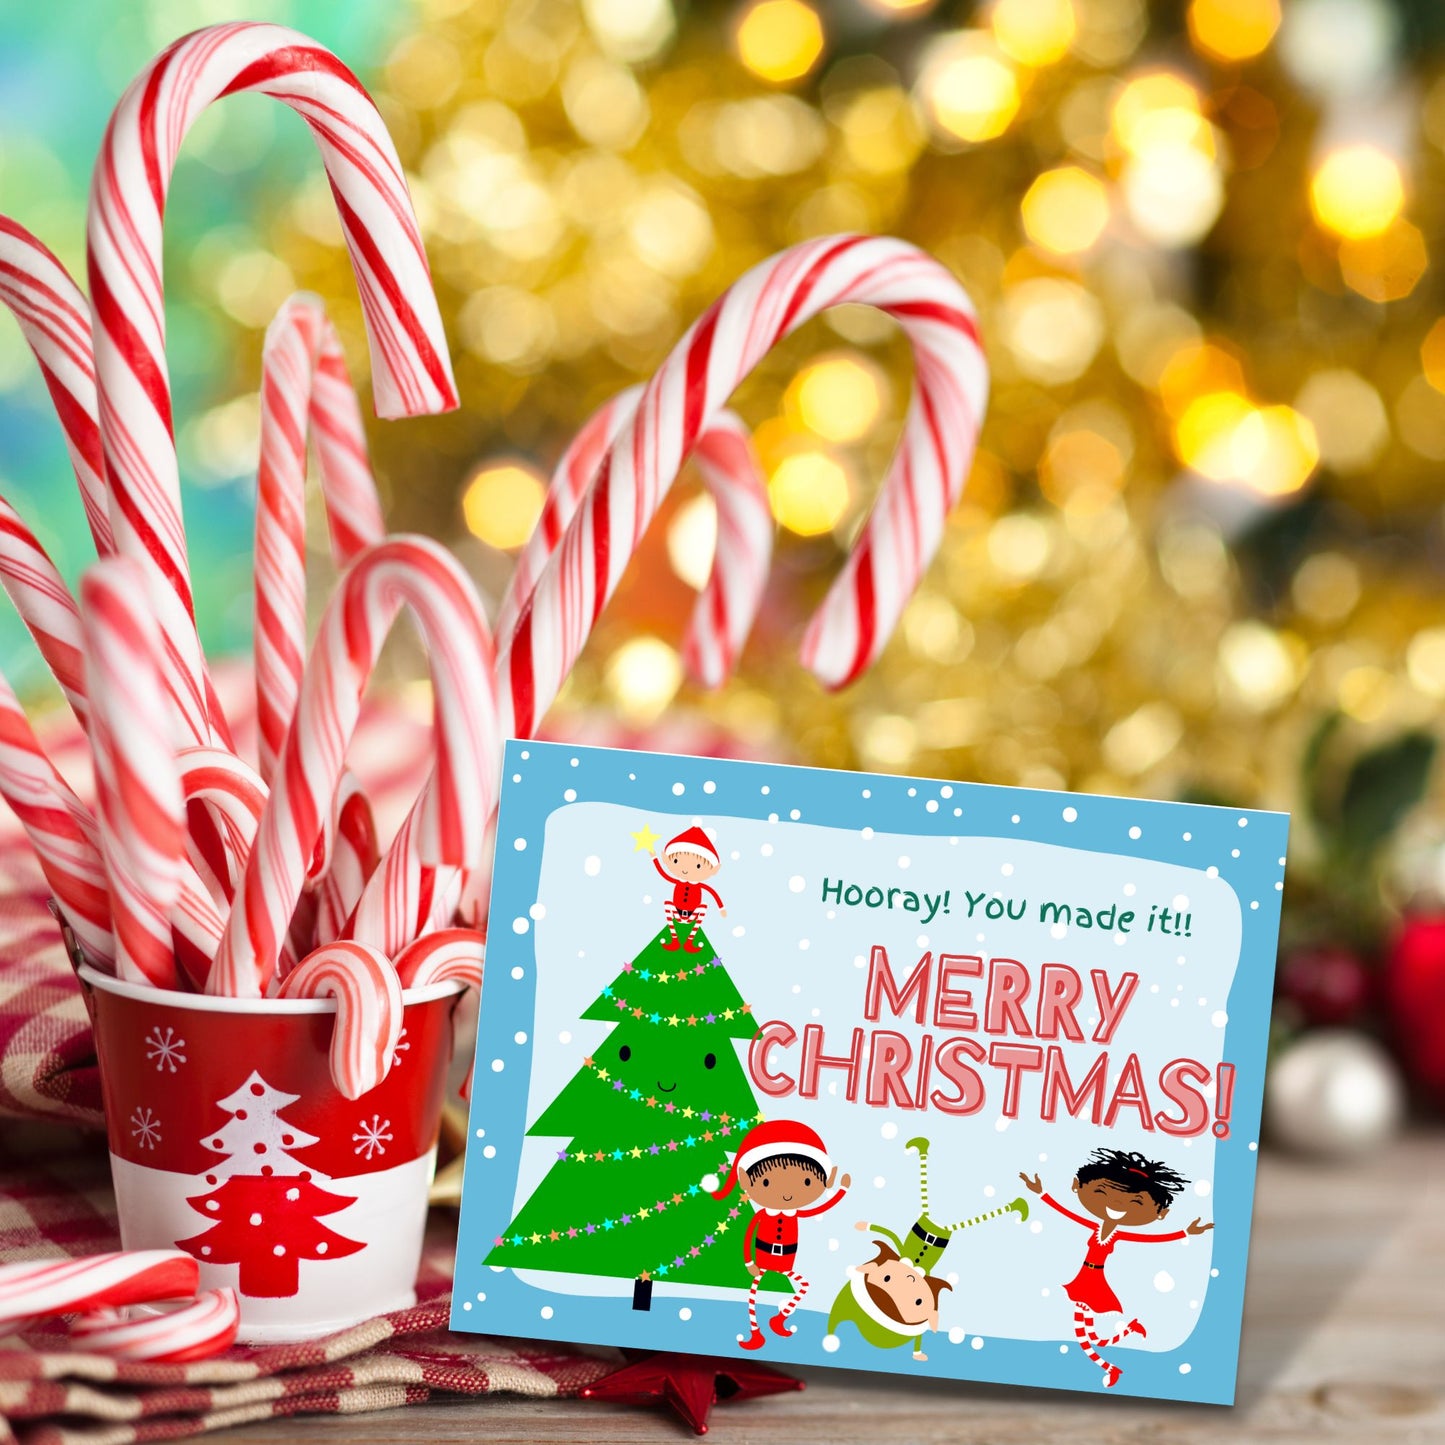 The final card in the Christmas treasure hunt is set-up next to a cup full of candy canes.